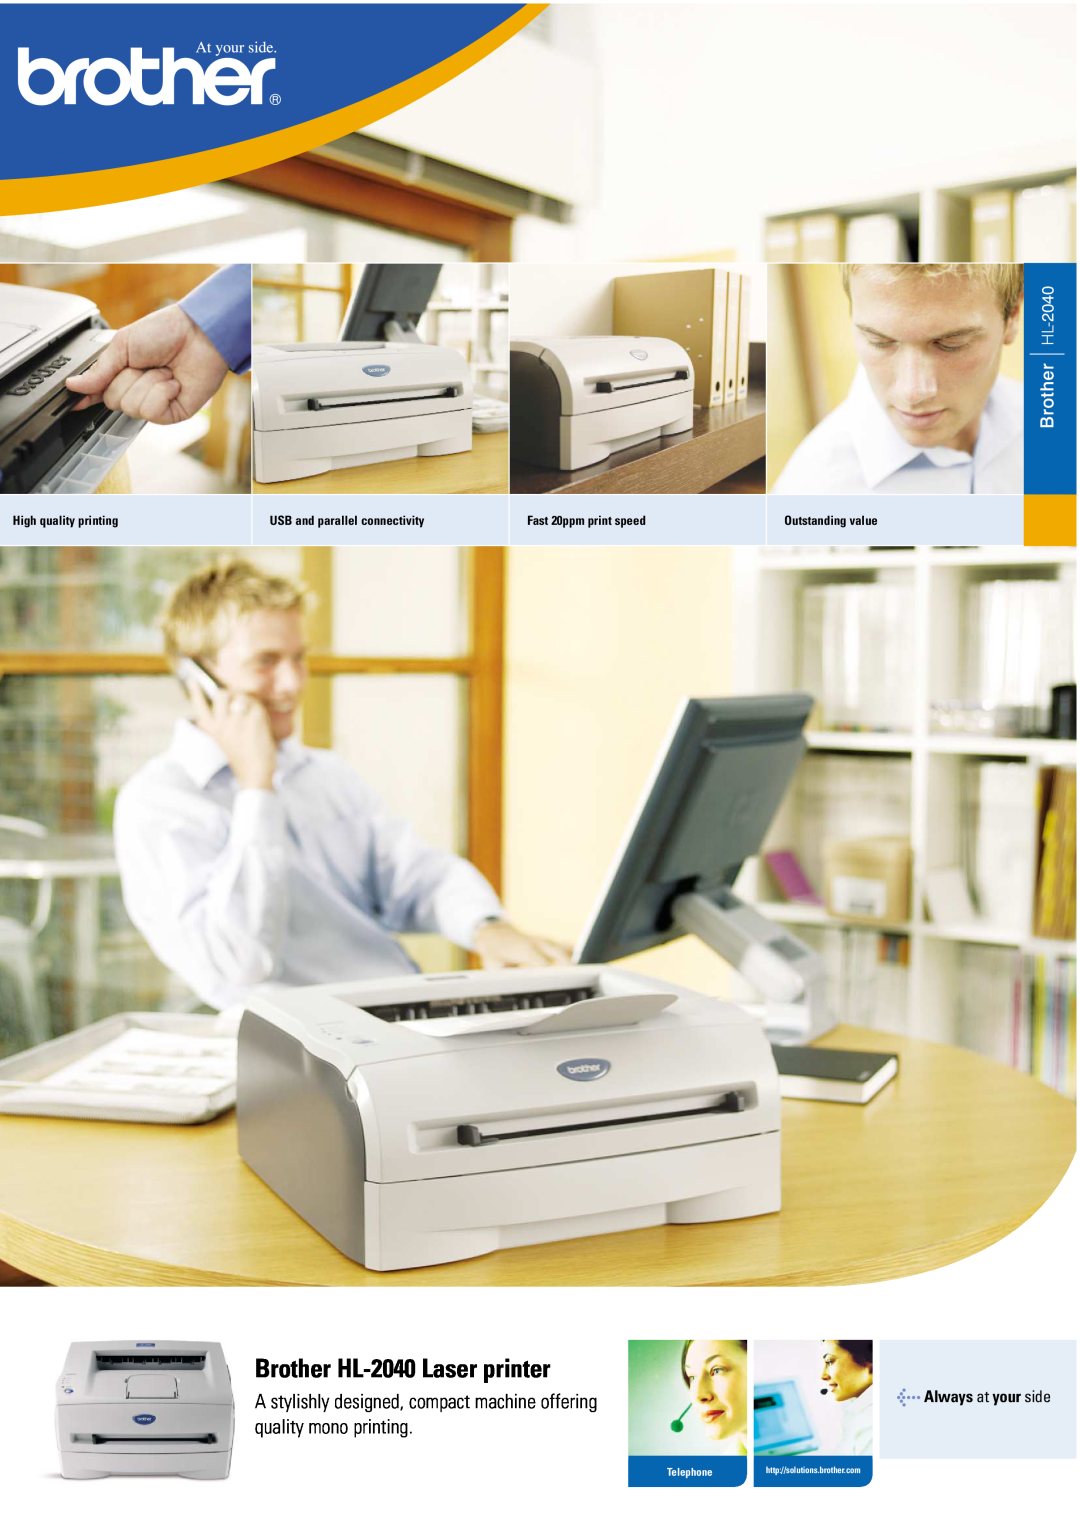 Brother manual Always at your side, Brother HL-2040 Laser printer, A stylishly designed, compact machine offering 